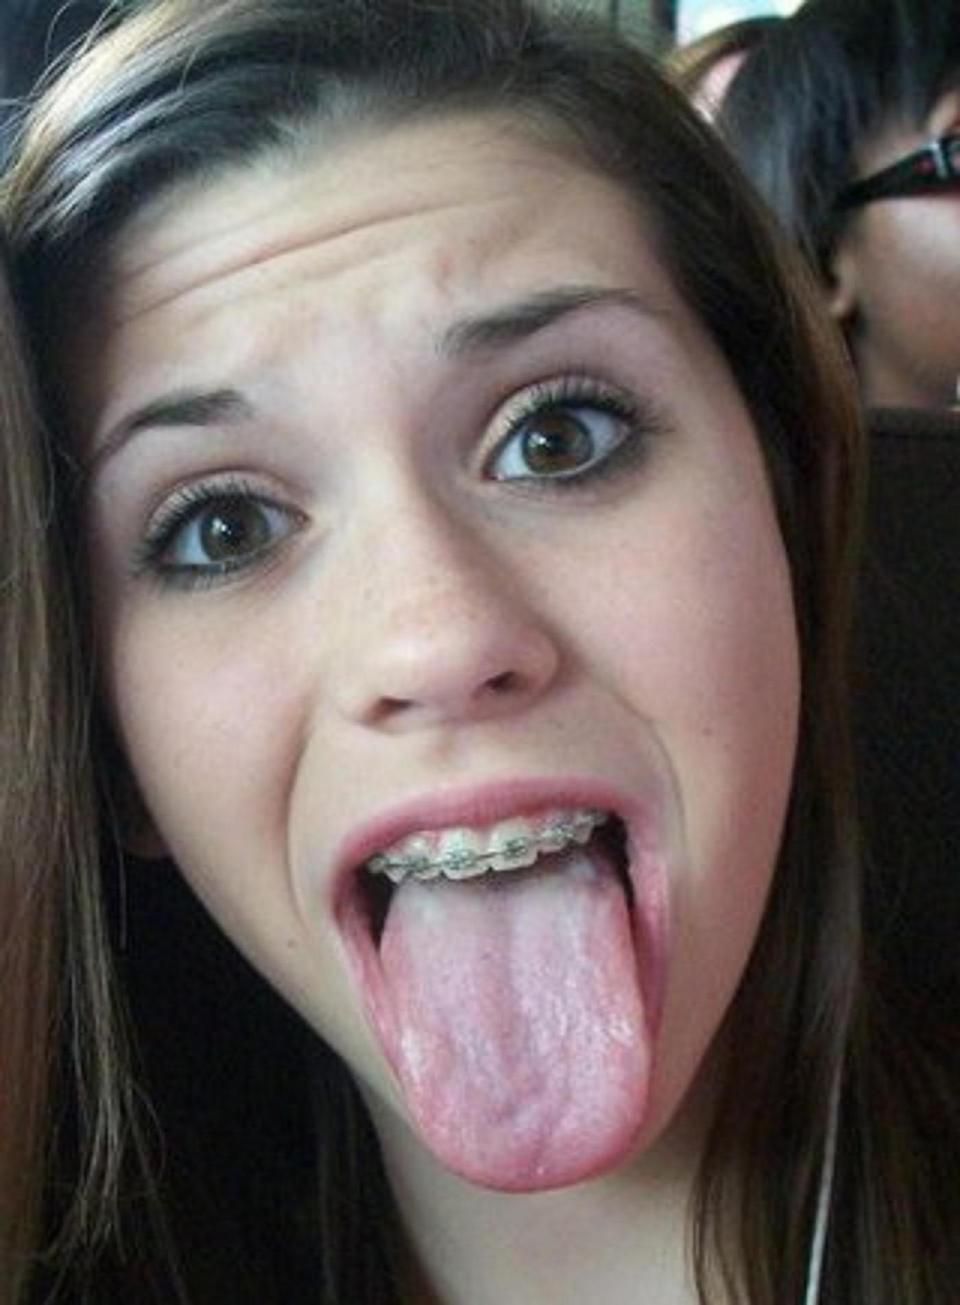 Cum On Tongue Mouth